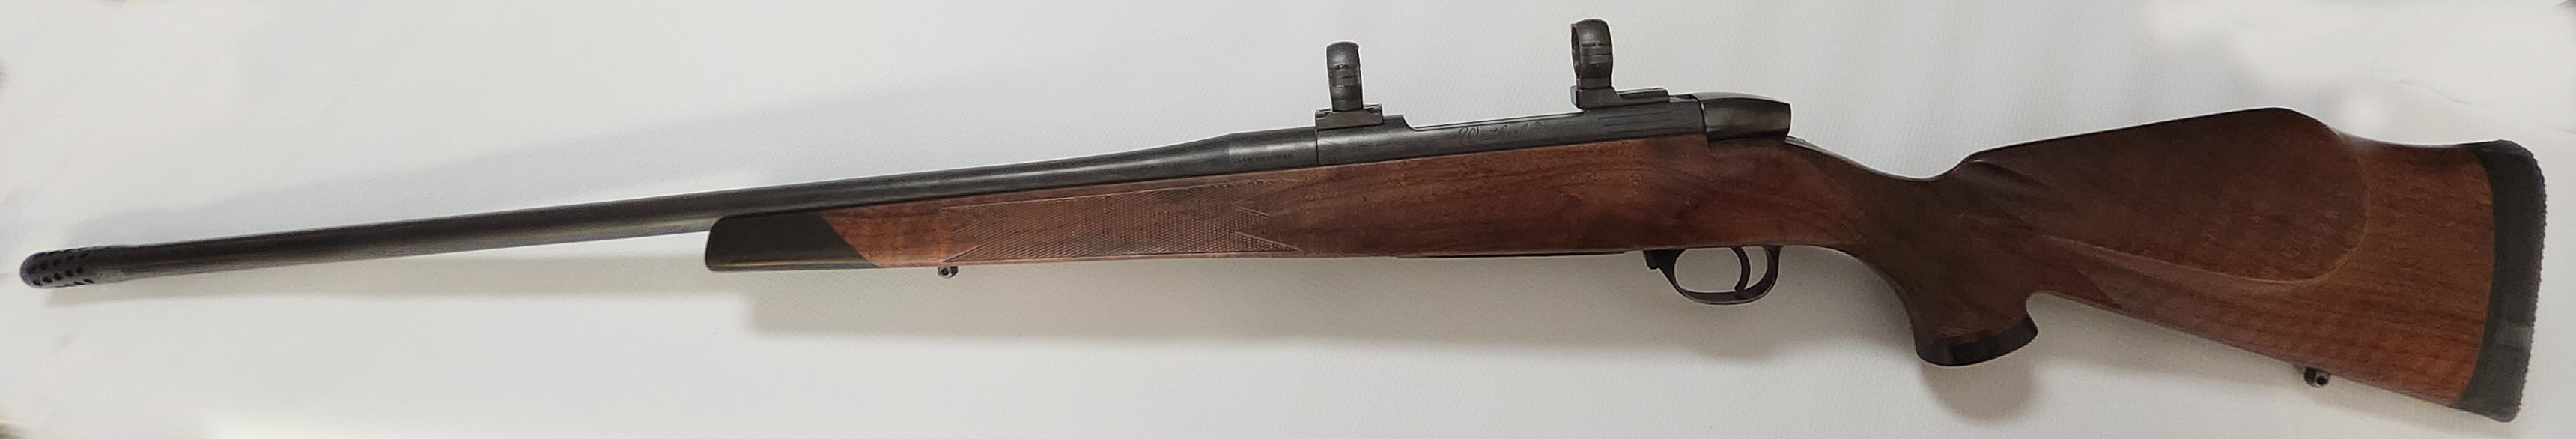 Weatherby Mark V Euromark Rifle 340 Weatherby Magnum 26" Barrel with Walnut Stock